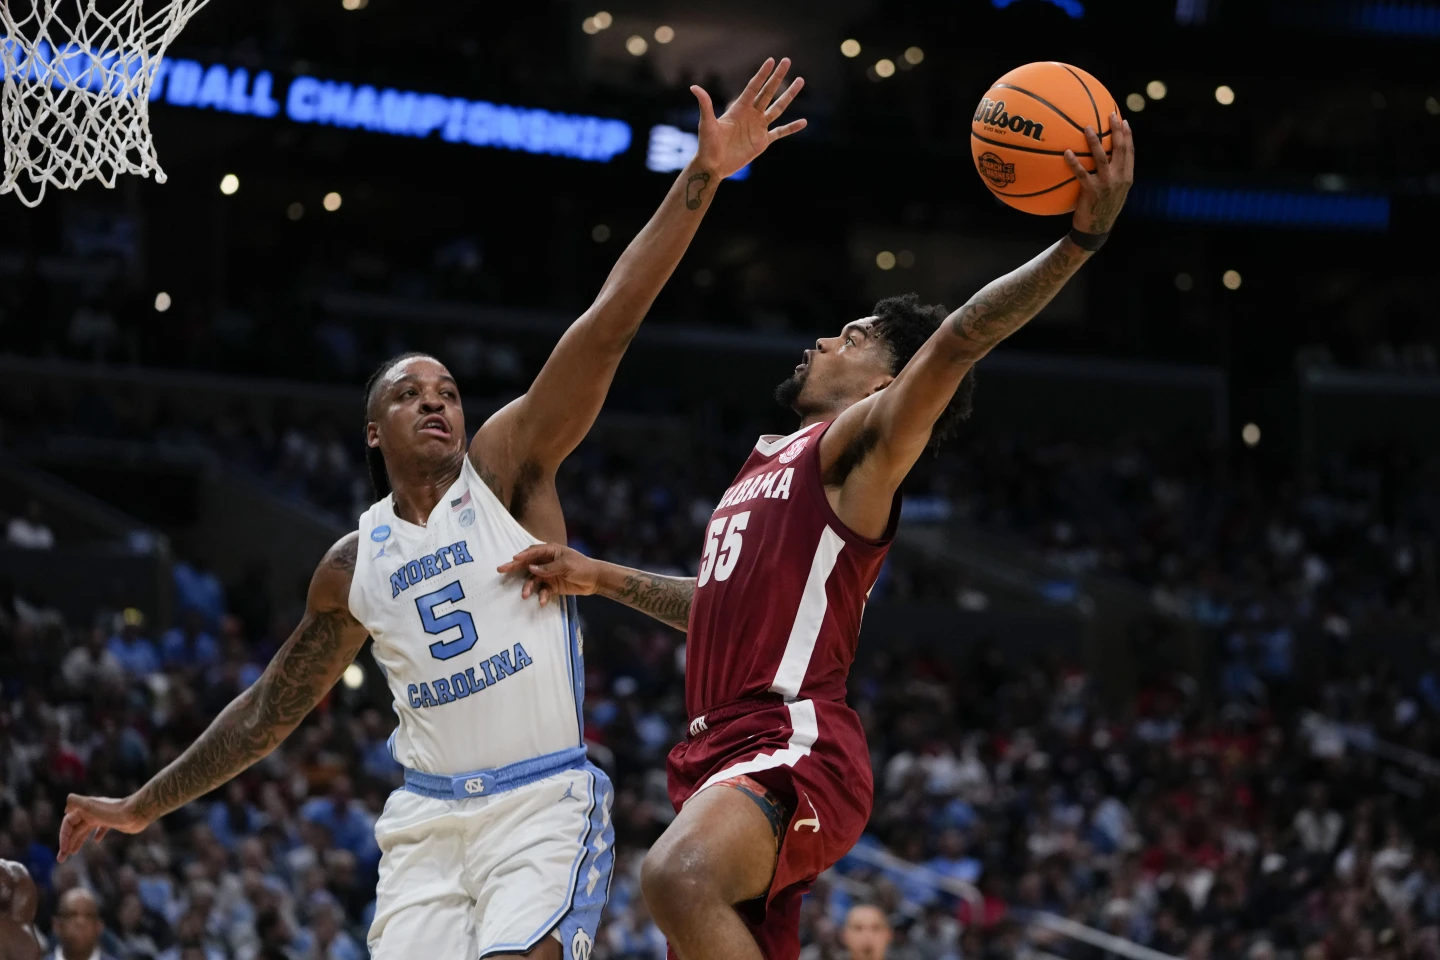 Emotional, heartbreaking end for UNC, Armando Bacot as Alabama pulls upset